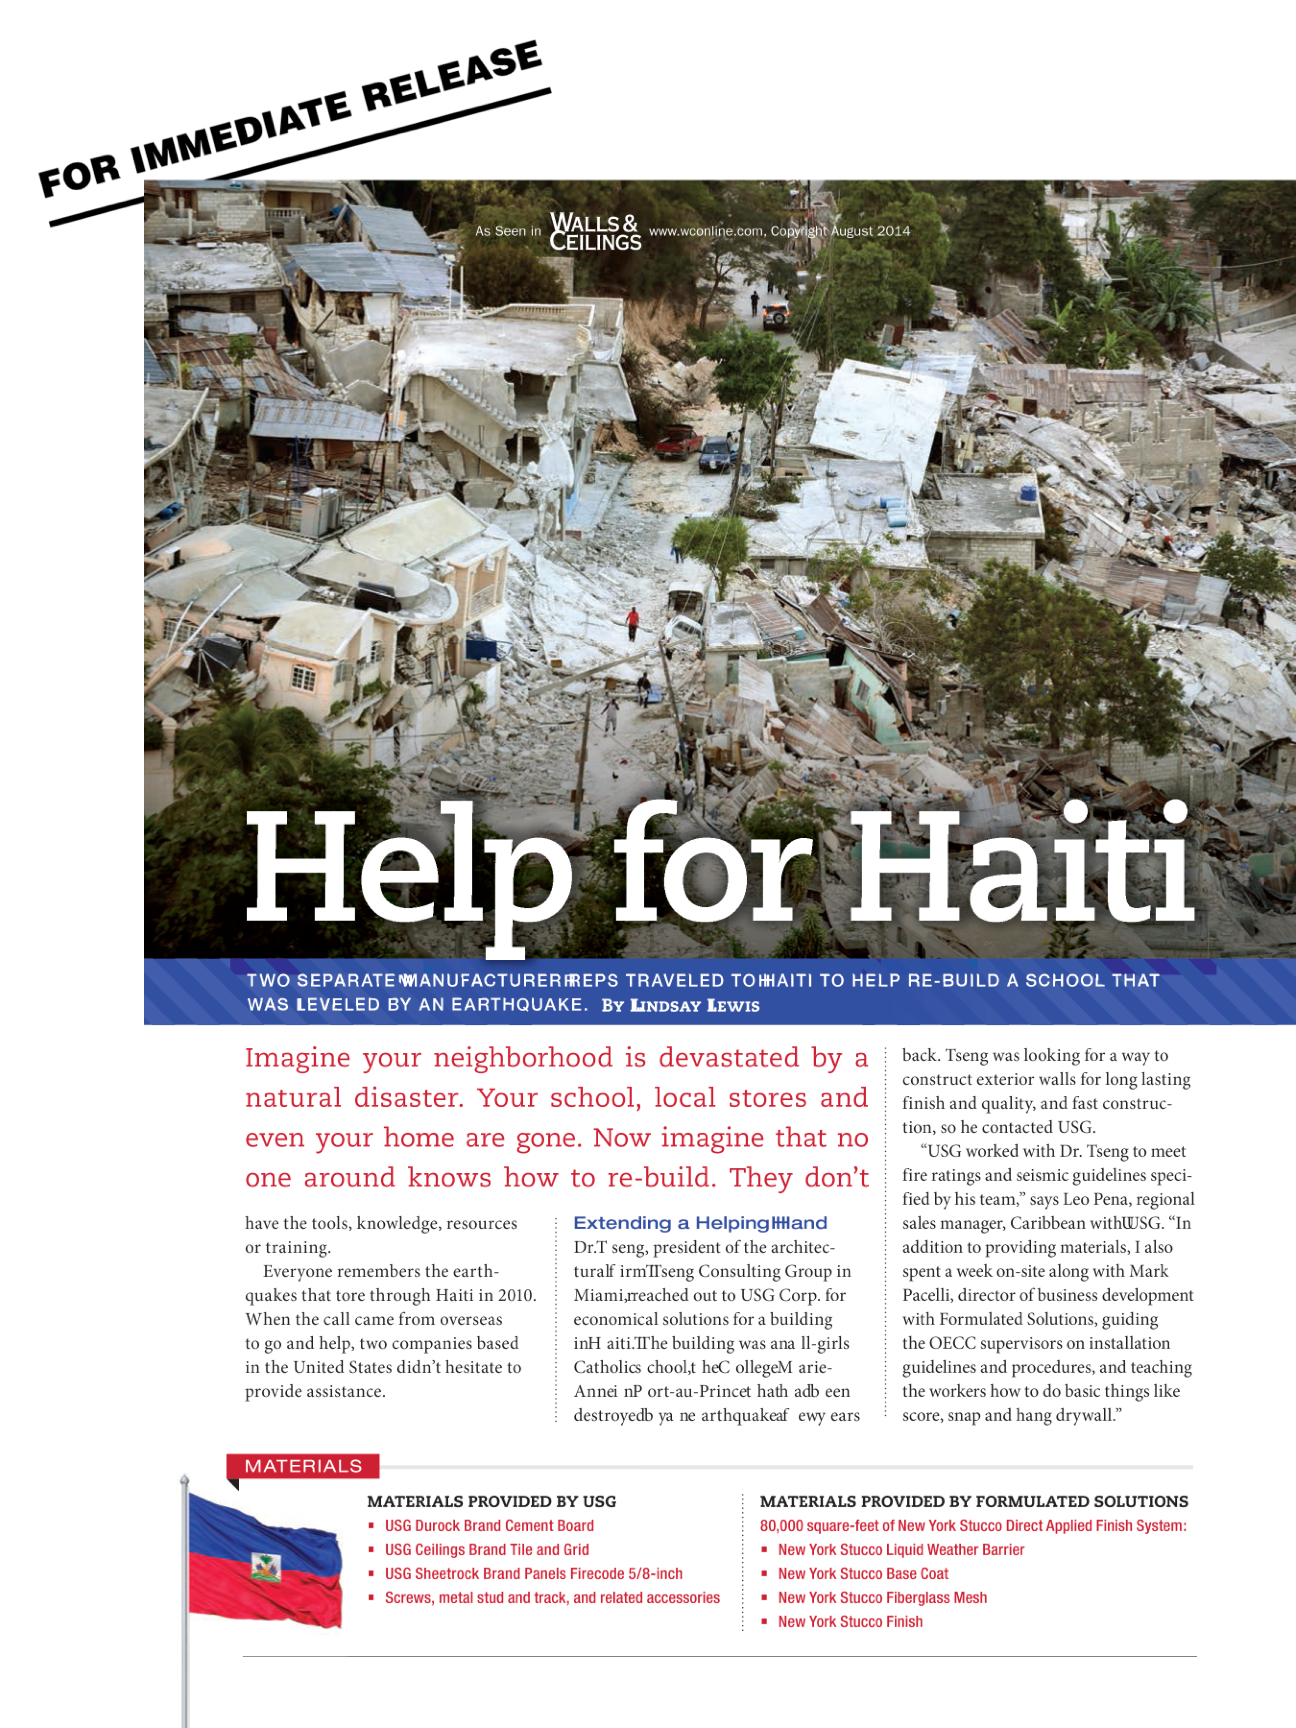 First page of a feature article in entitled “Help for Haiti” which features our client’s products and assistance to that nation. A “for immediate release” diagonally place at the upper left corner suggests that this article resulted from a press release. (It did.)